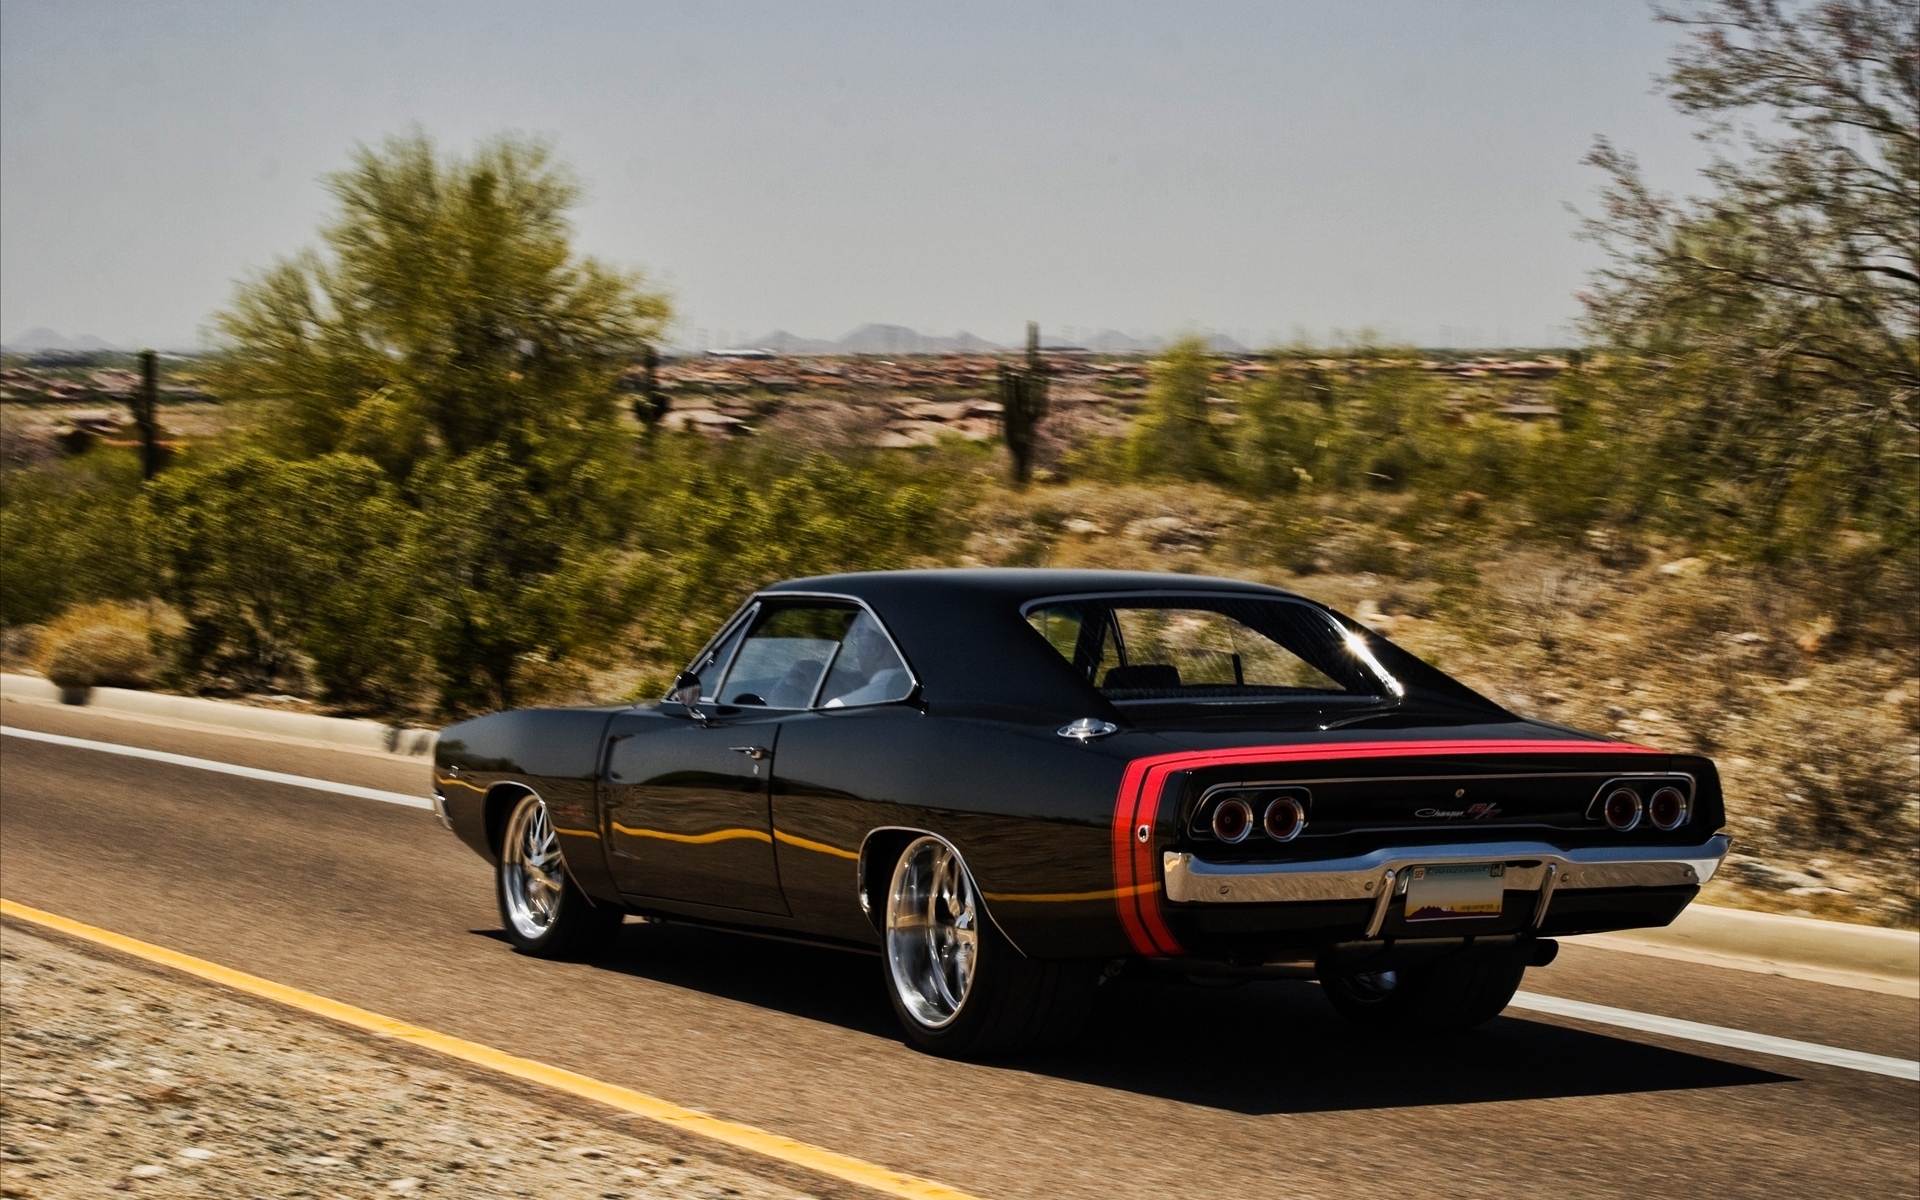 Dodge Charger Wallpaper Full Screen - Dodge Charger 1968 Background - HD Wallpaper 